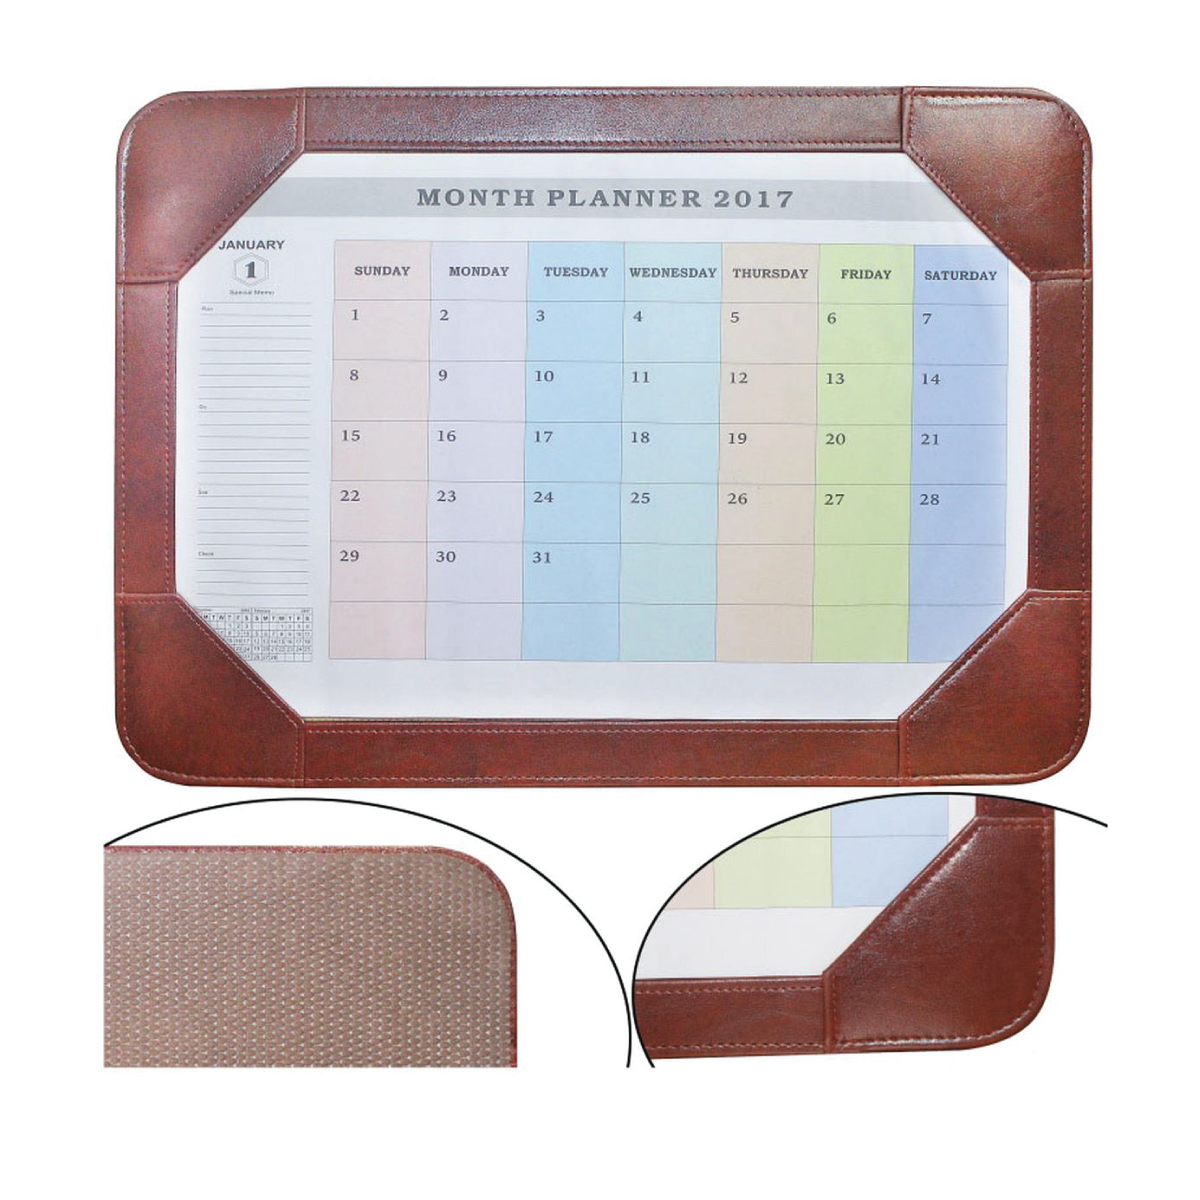 Brown Table Monthly Planner - For Shops, Schools, Corporates, Office Use JATMPB01/S00